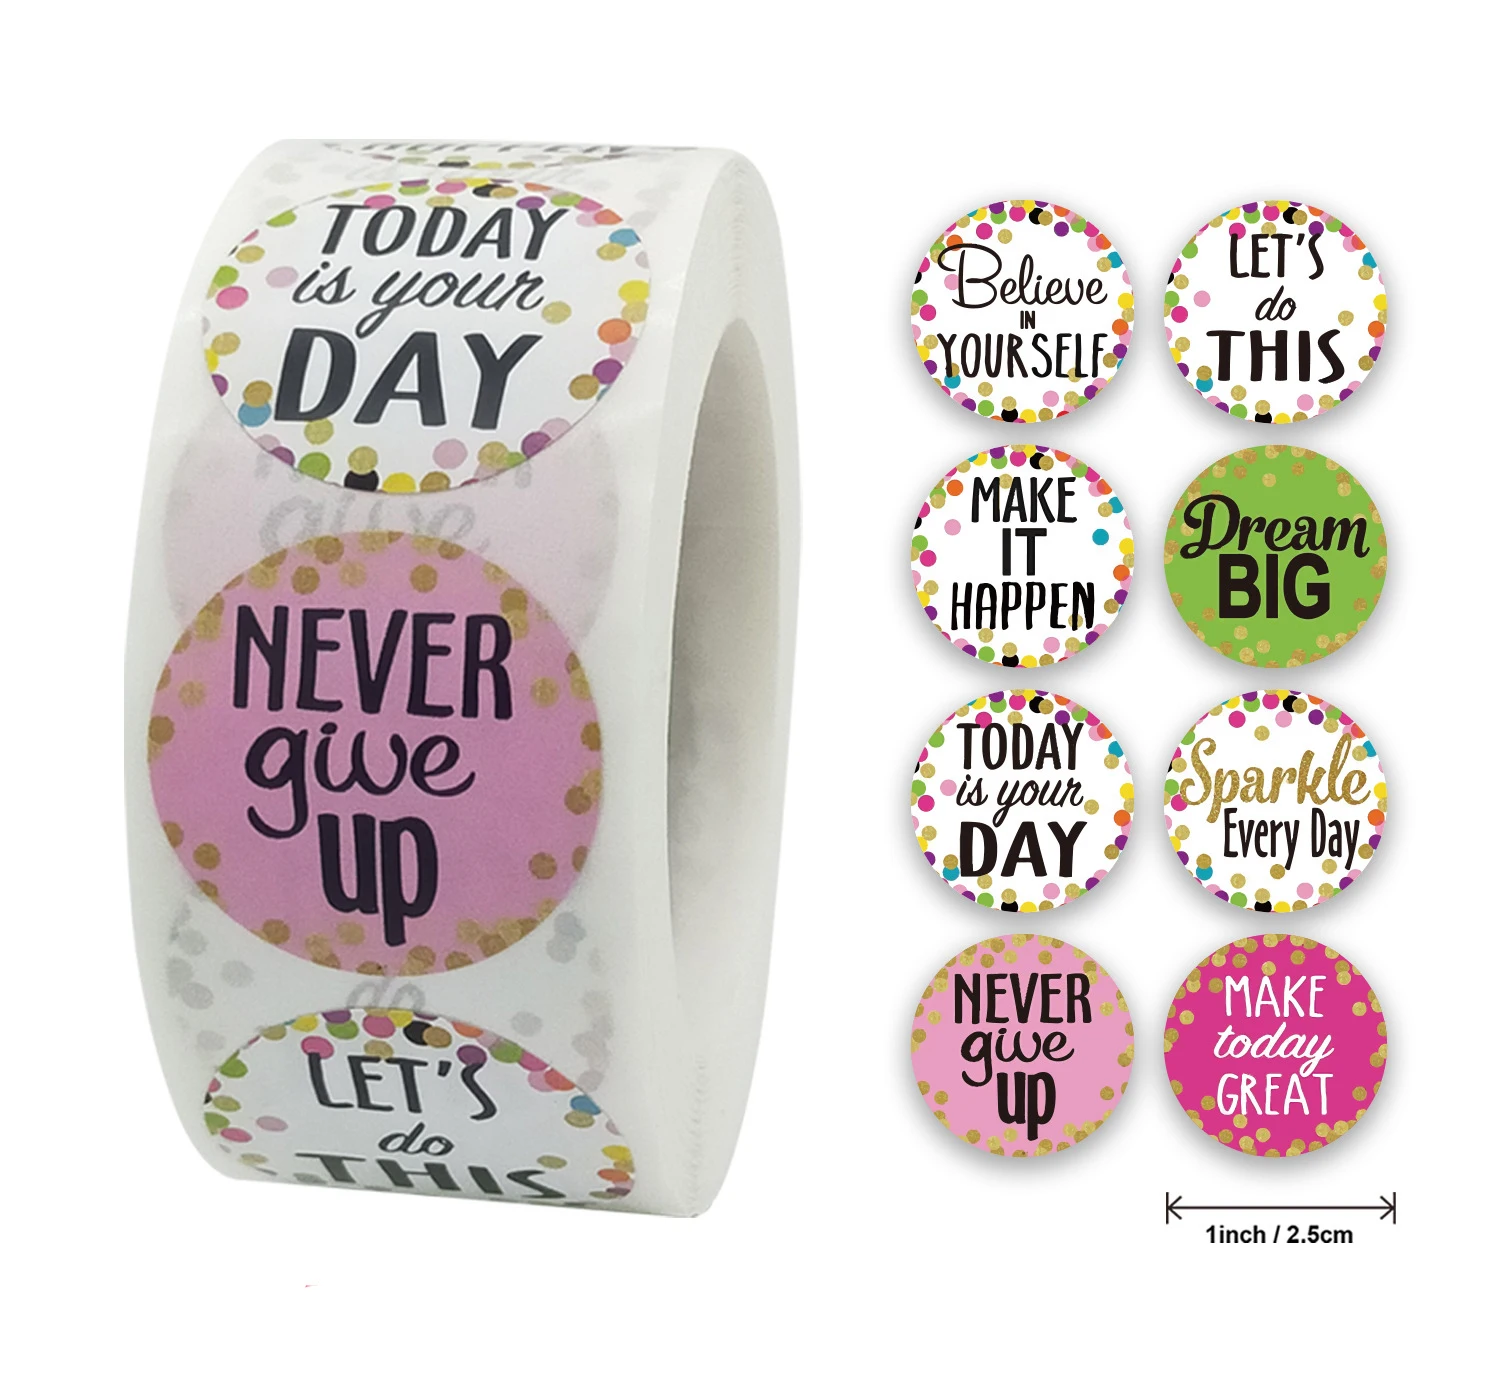 

500pcs Reward Stickers Encouragement Sticker for Kids Motivational Stickers with Toys for Students Teachers kawaii stickers